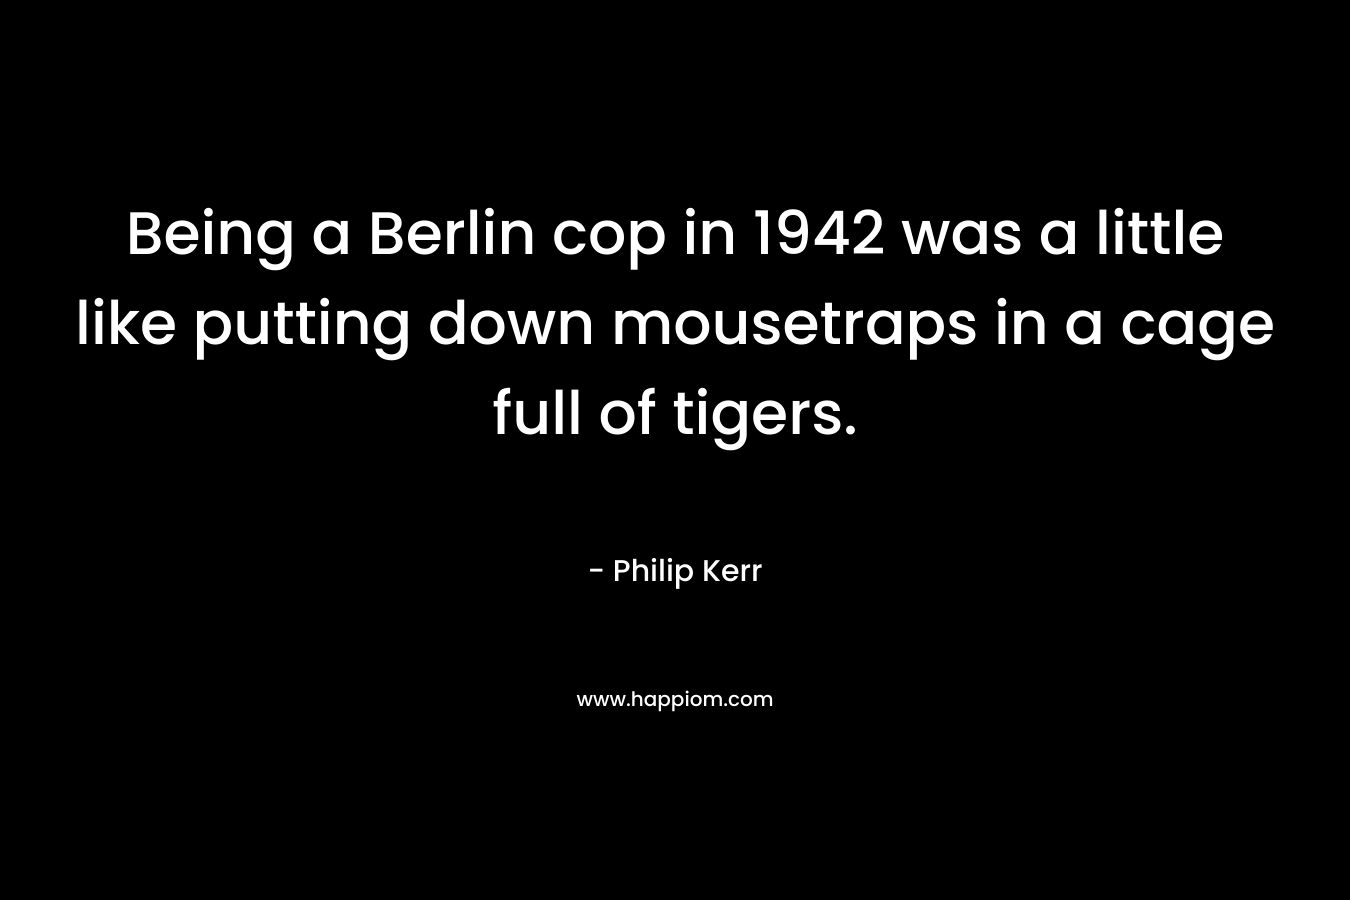 Being a Berlin cop in 1942 was a little like putting down mousetraps in a cage full of tigers. – Philip Kerr